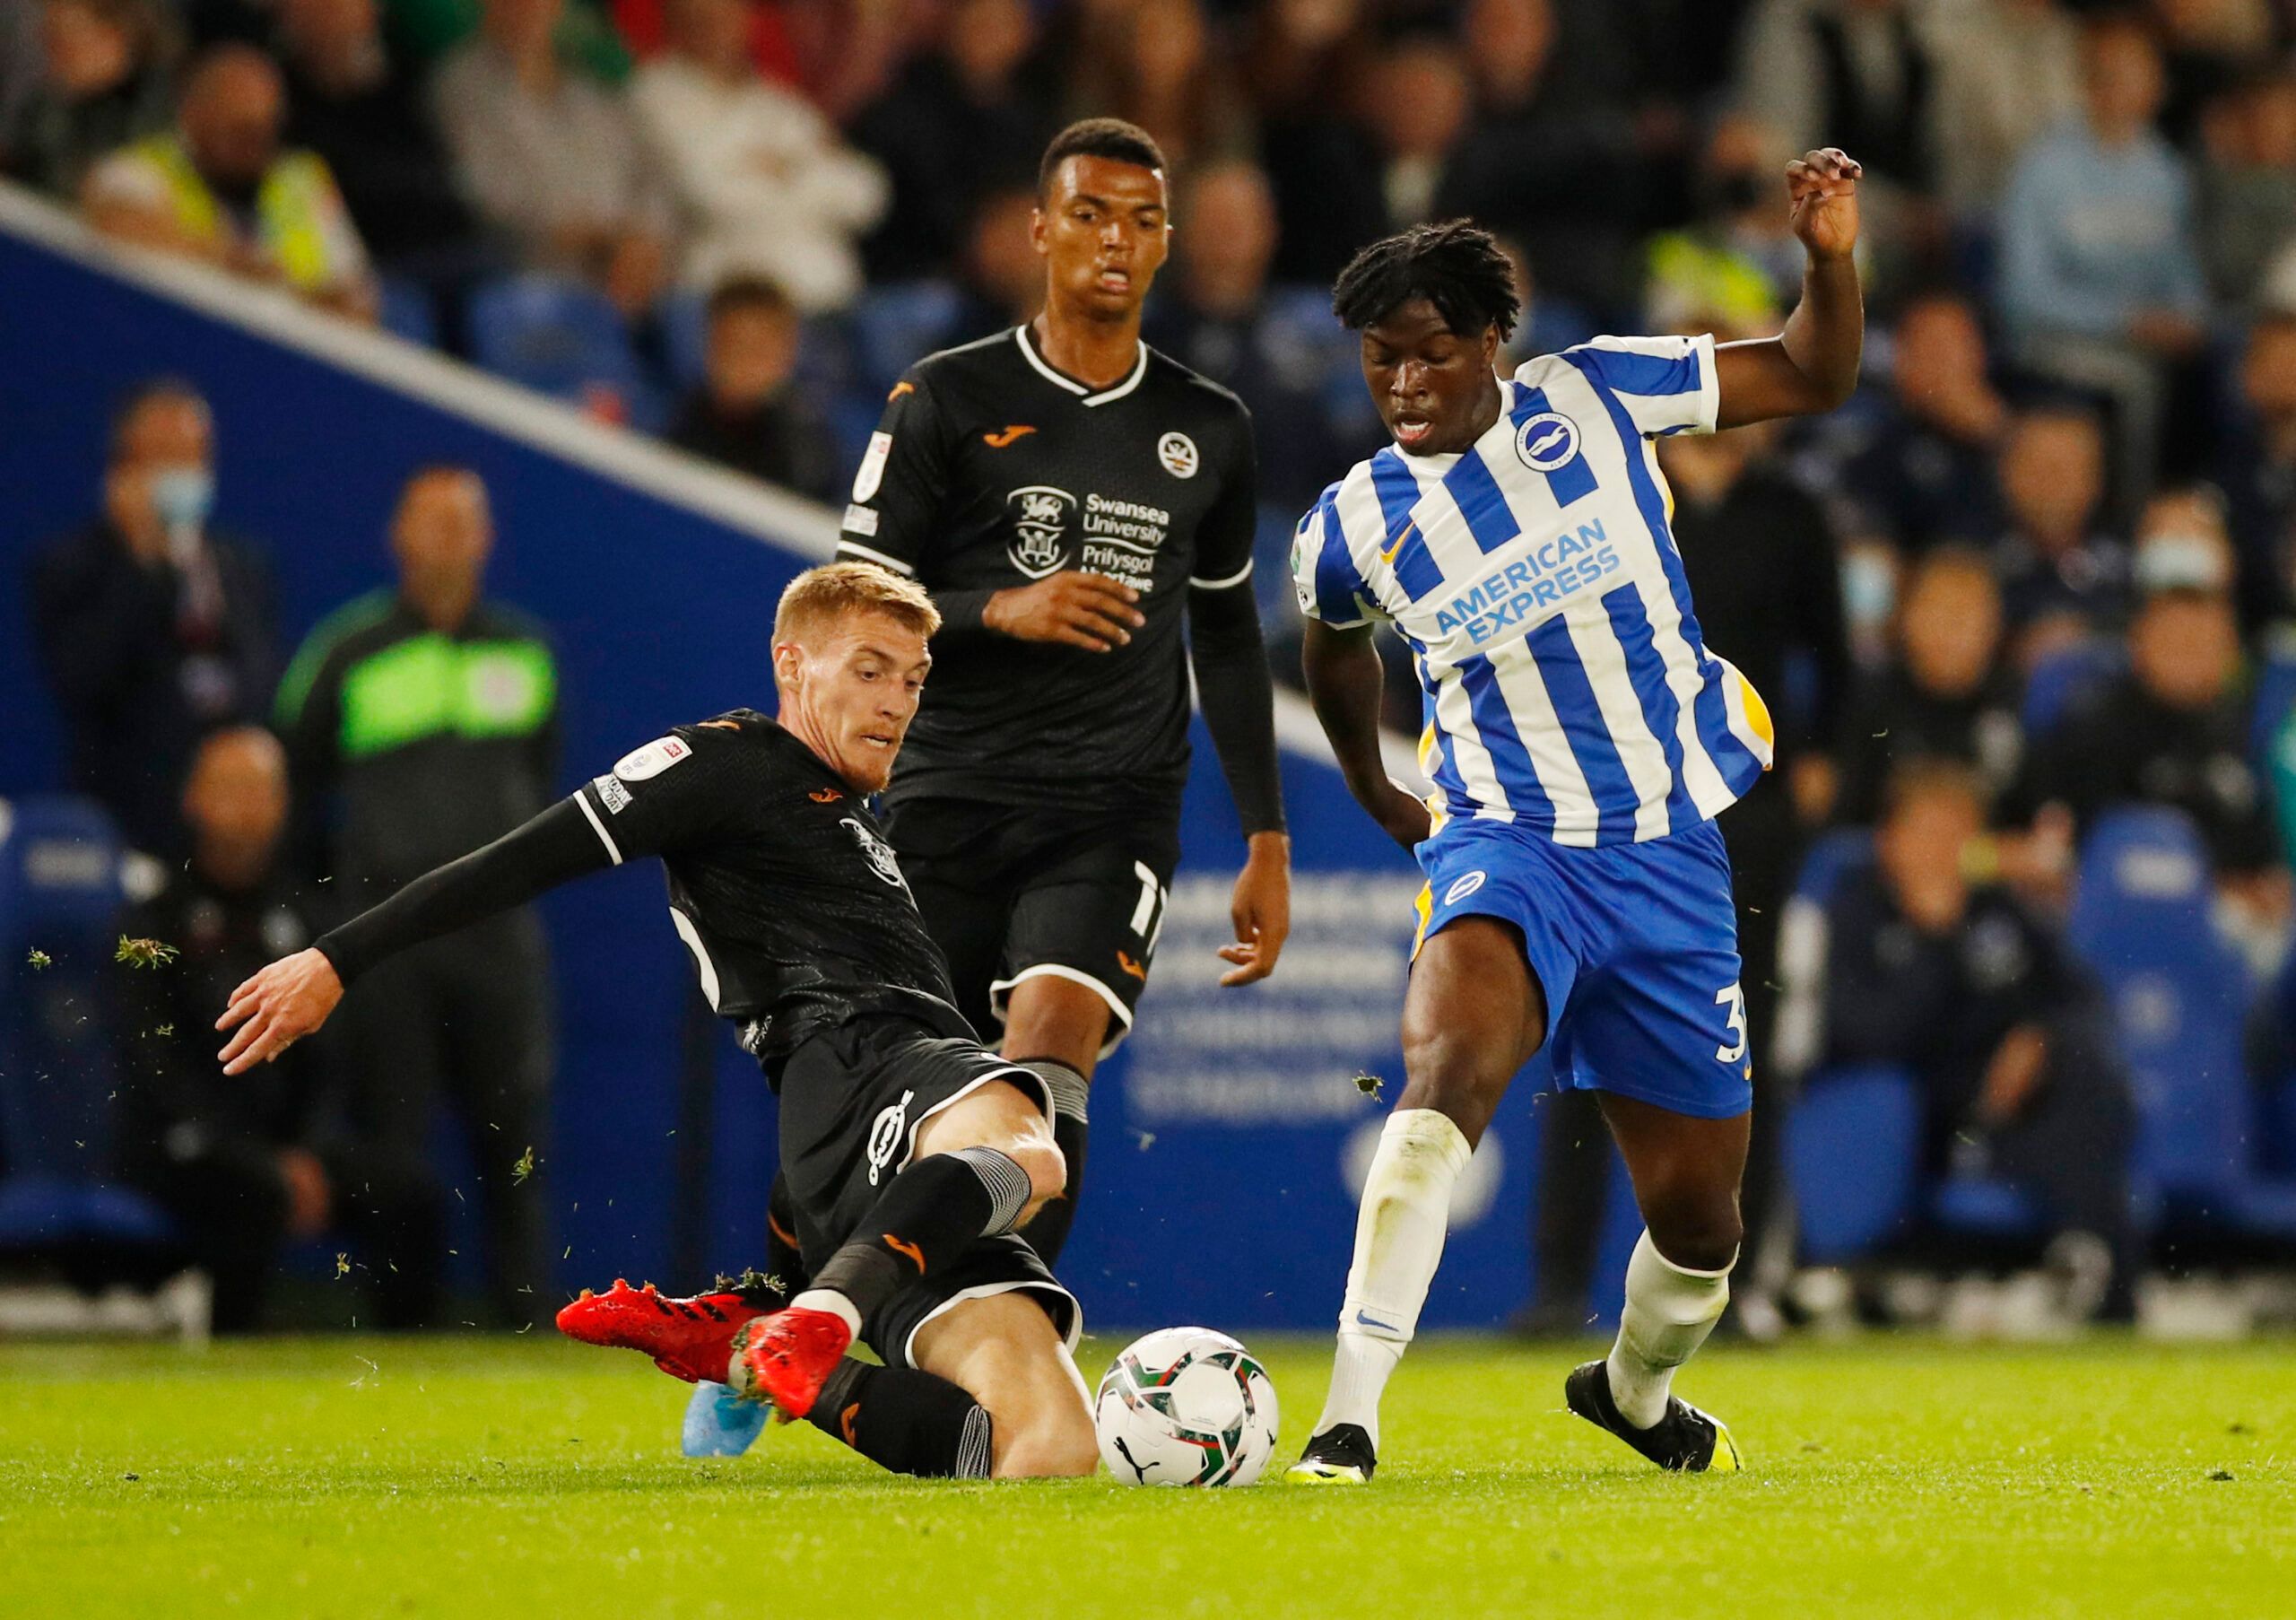 Soccer Football - Carabao Cup - Third Round - Brighton &amp; Hove Albion v Swansea City - The American Express Community Stadium, Brighton, Britain - September 22, 2021 Swansea City's Jay Fulton in action with Brighton &amp; Hove Albion's Taylor Richards Action Images via Reuters/Andrew Boyers EDITORIAL USE ONLY. No use with unauthorized audio, video, data, fixture lists, club/league logos or 'live' services. Online in-match use limited to 75 images, no video emulation. No use in betting, games 